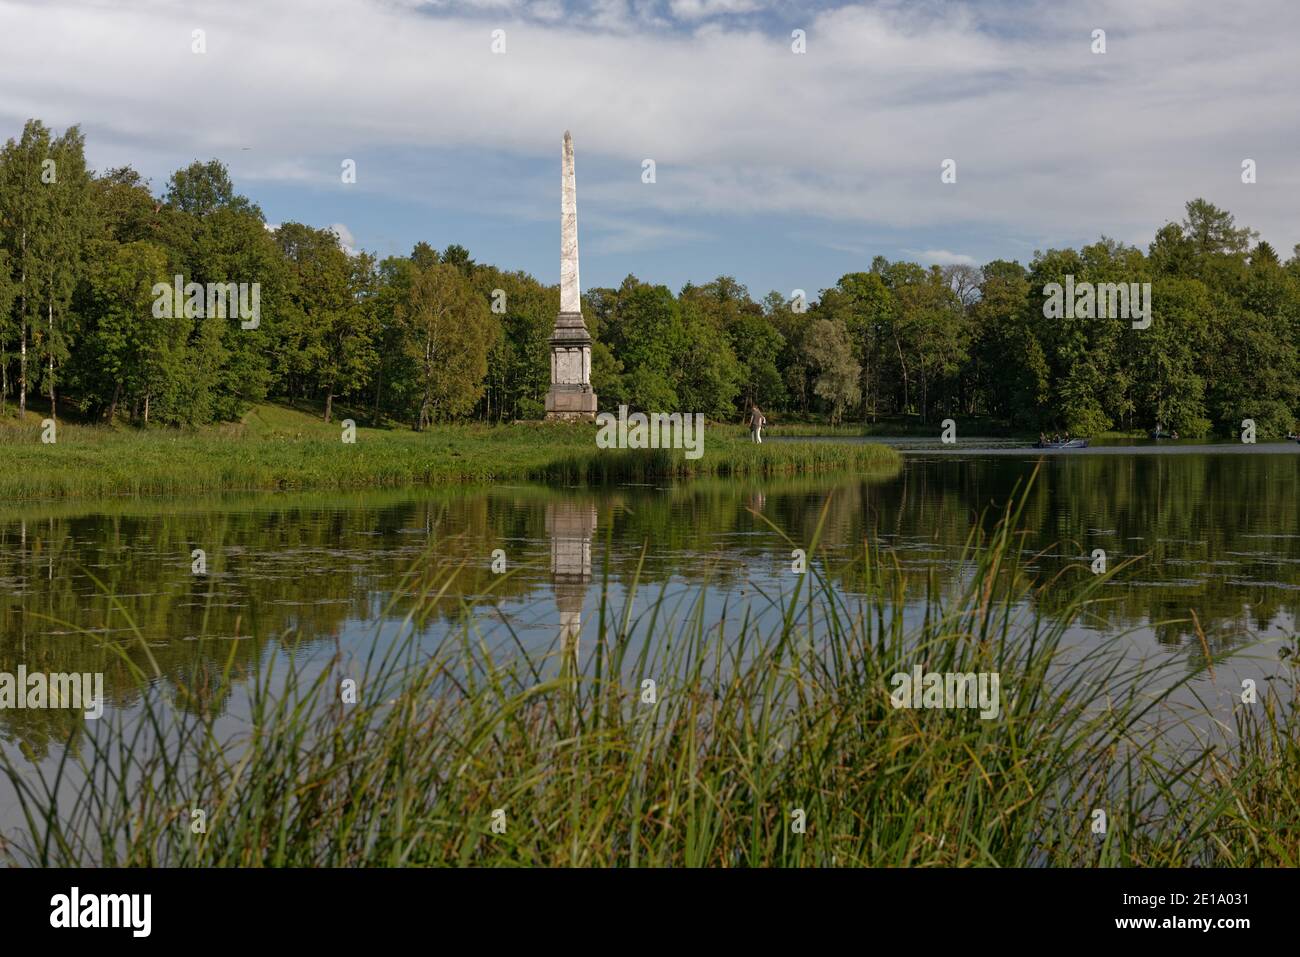 Cesme obelisk on the shore of lake Beloye in the park of Gatchina palace, Gatchina near St. Petersburg, Russia Stock Photo